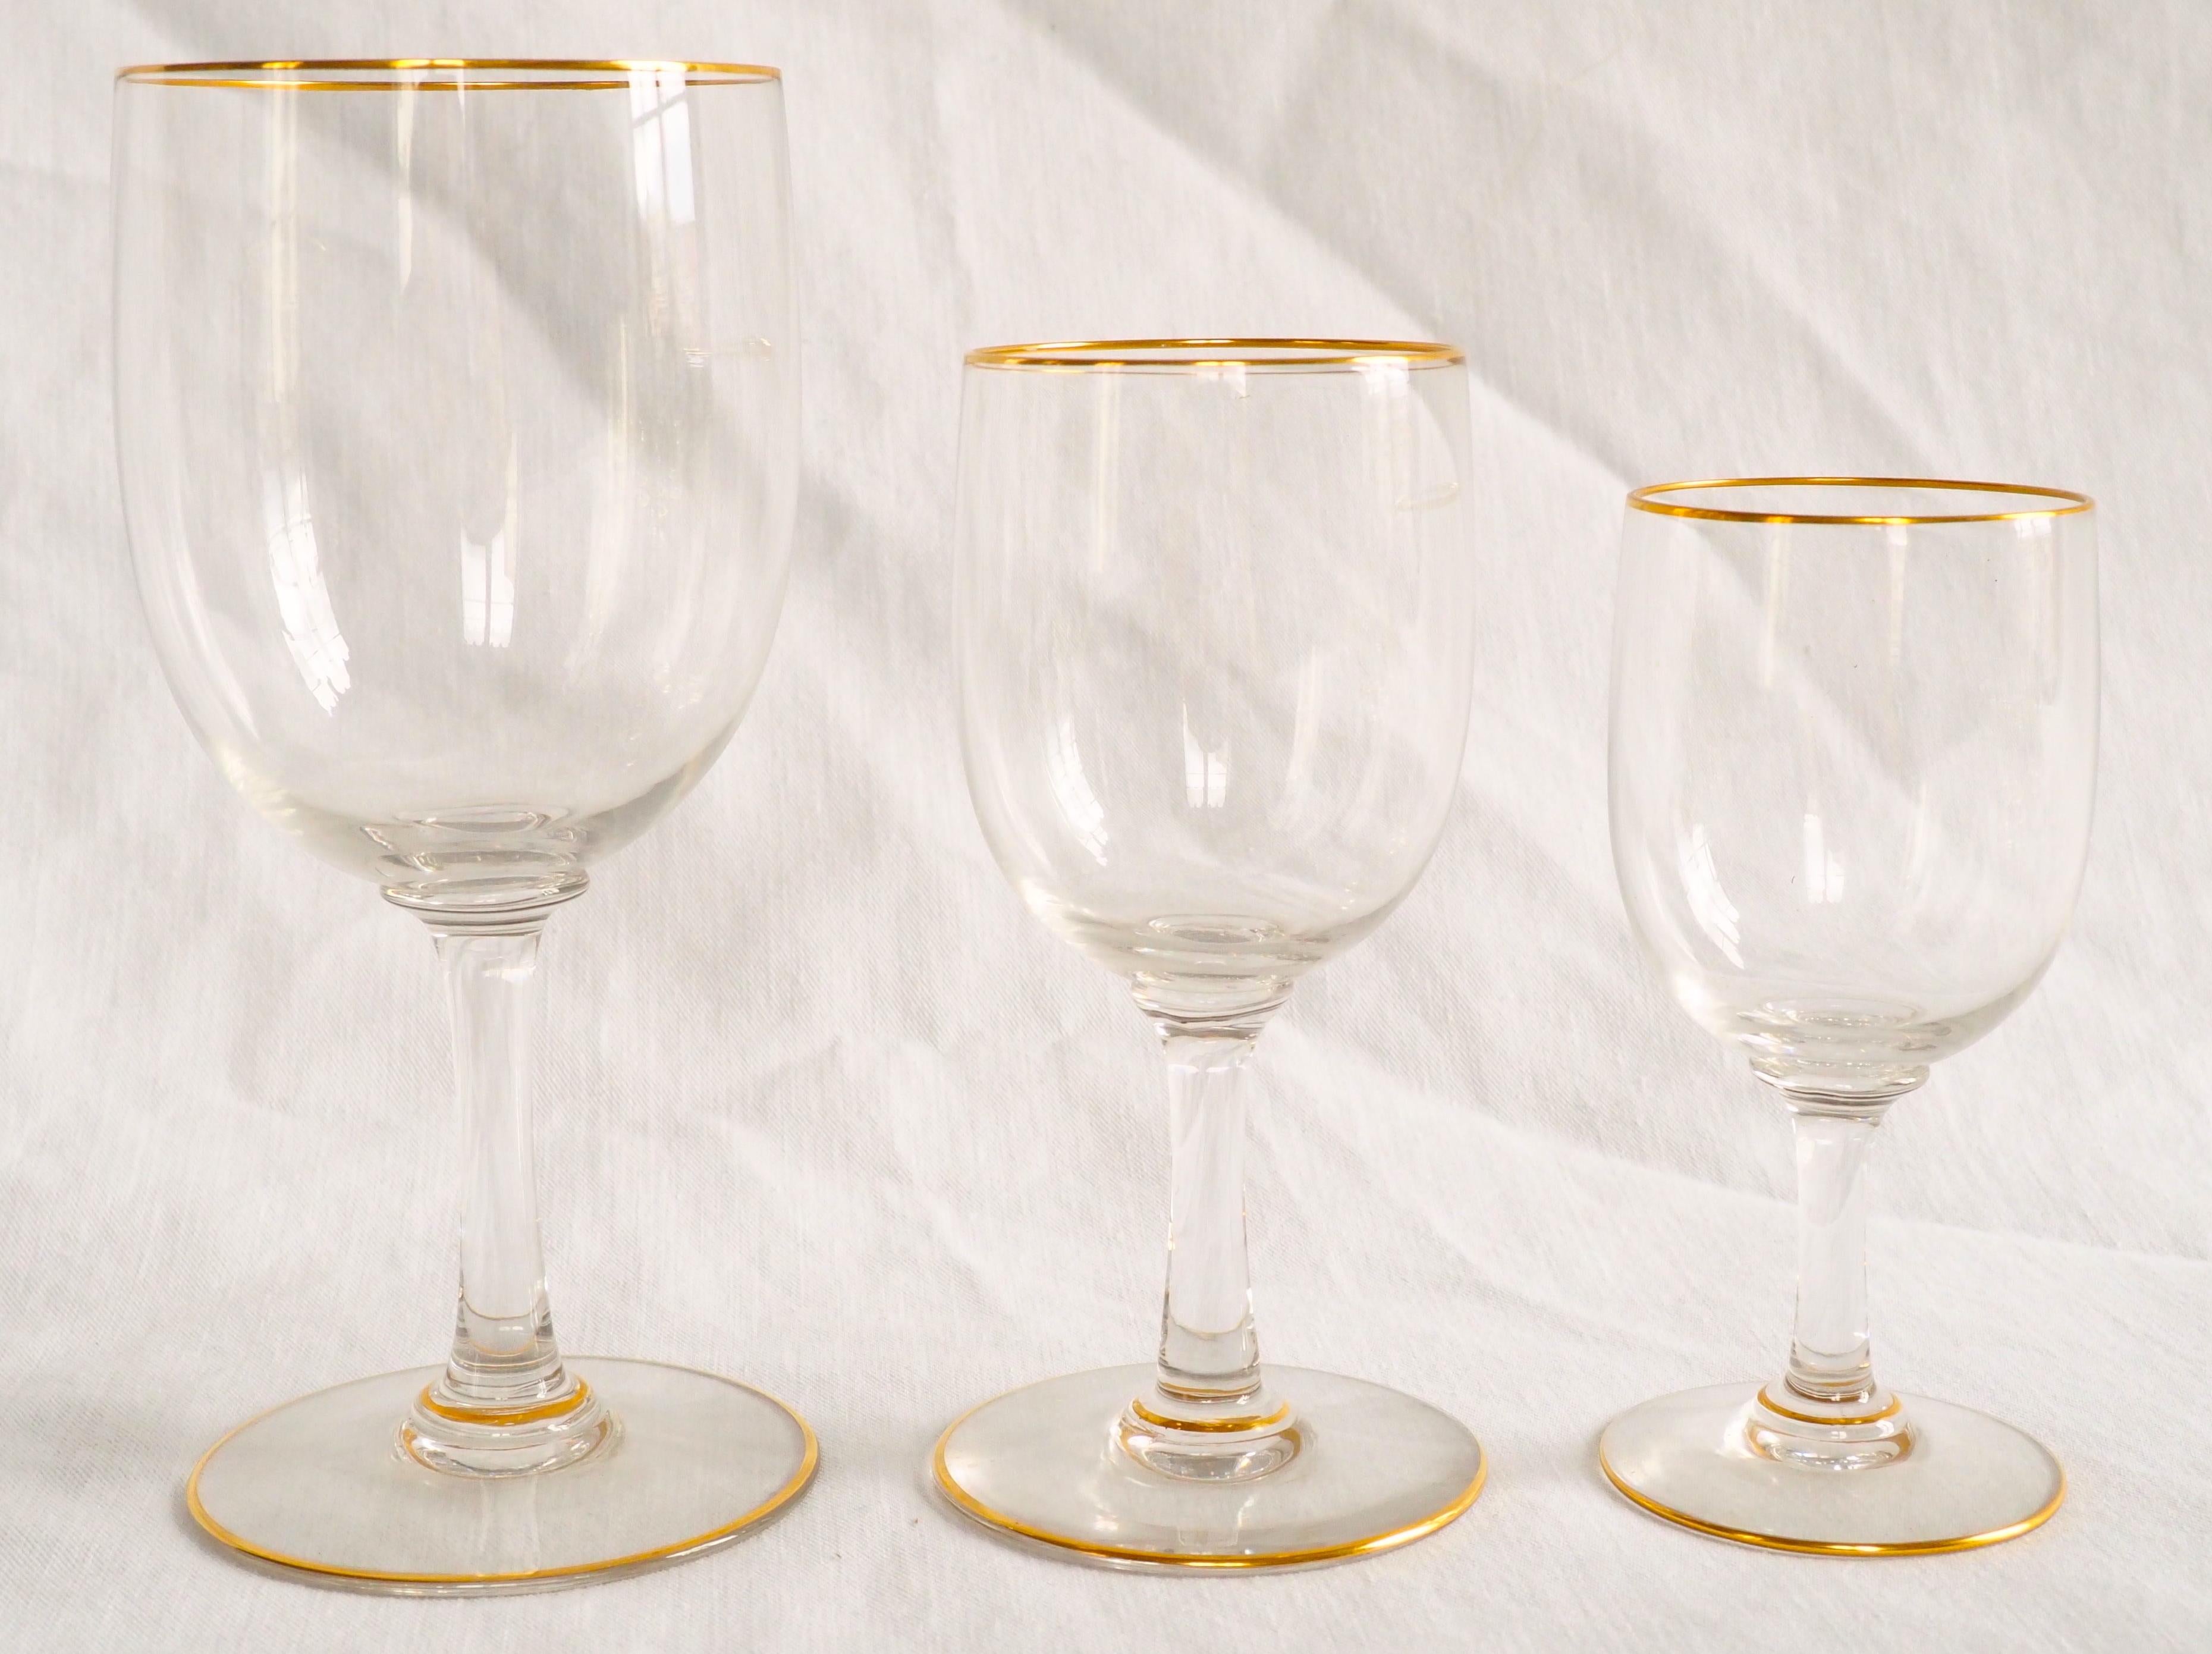 Modern Set of 3 Baccarat crystal glasses - France - Perfection model enhanced with gold